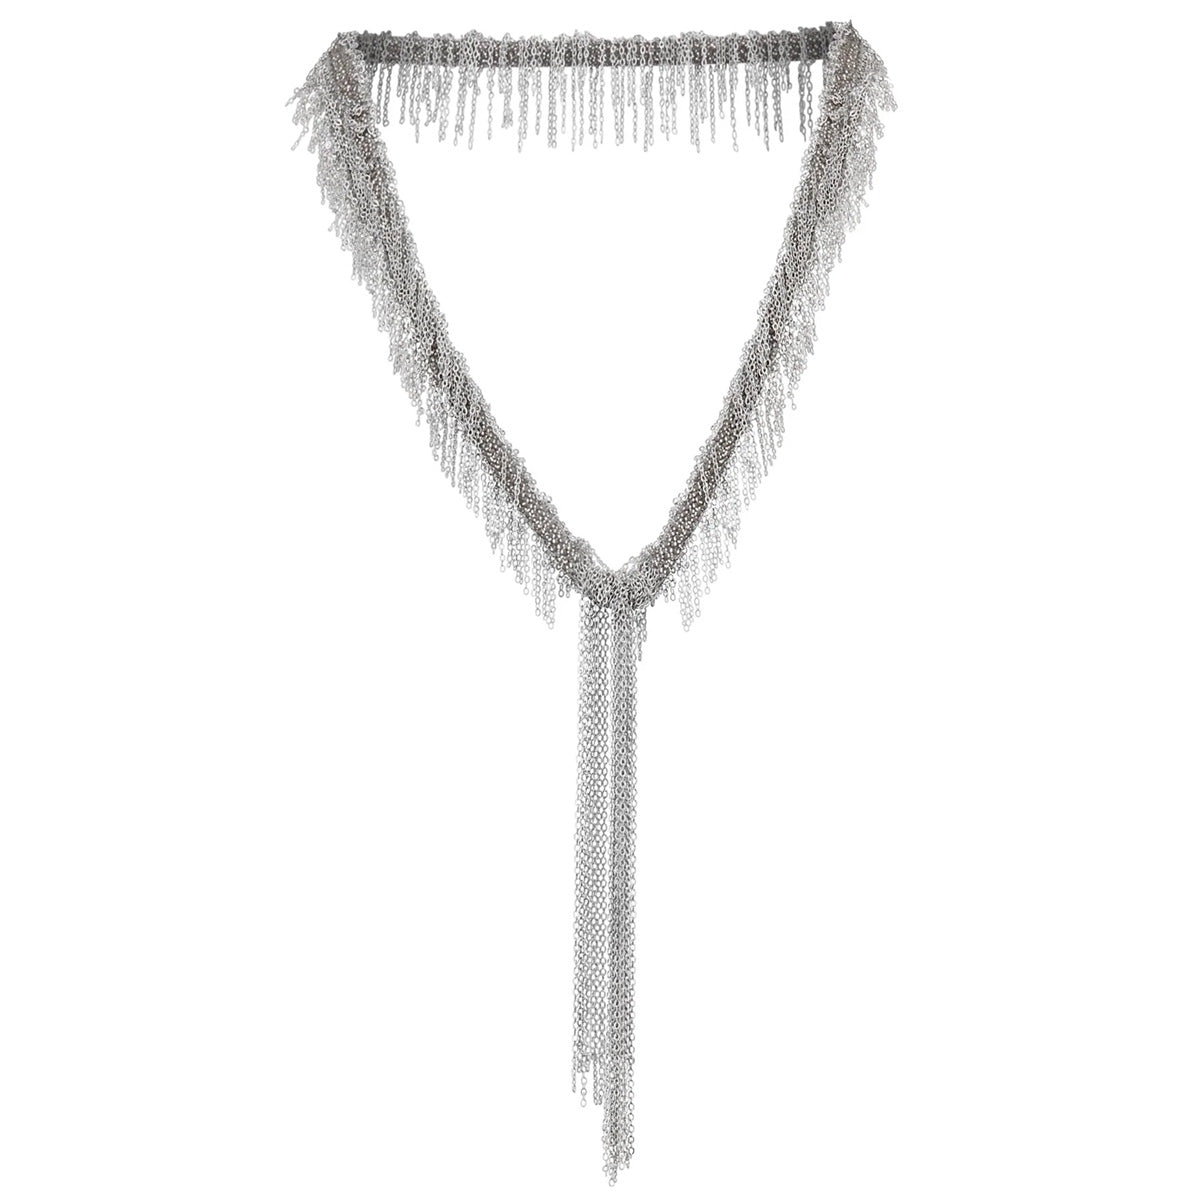 White Bronze & Grey Silk Woven "Fringe" Necklace with Chain Drop - Peridot Fine Jewelry - Marie Laure Chamorel